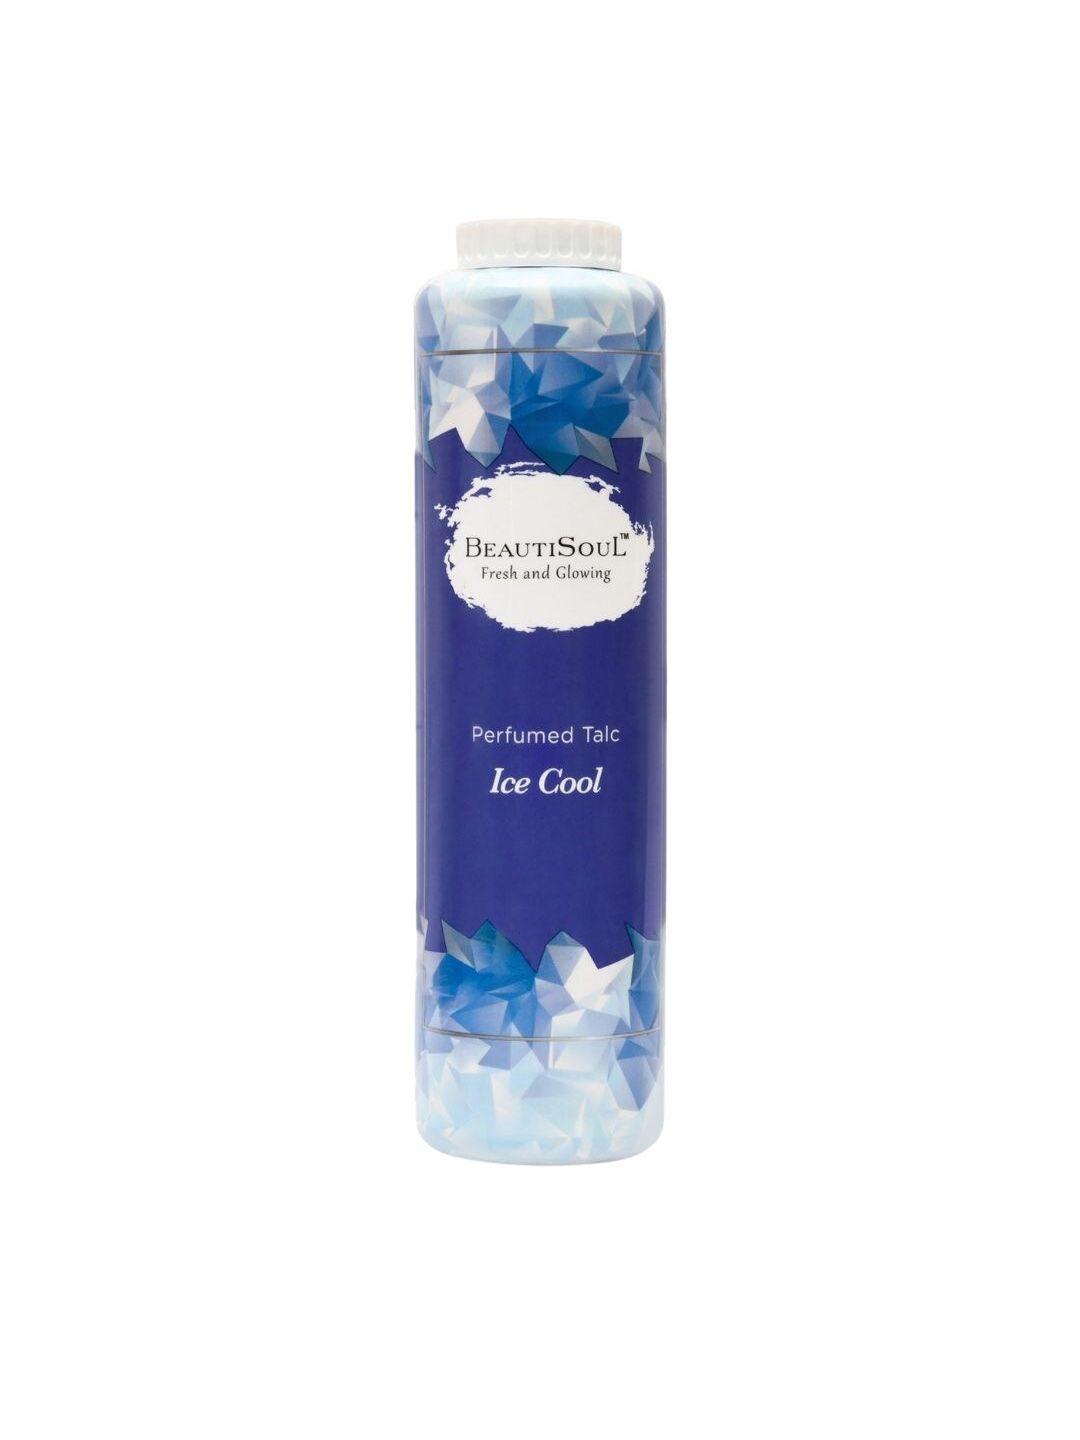 beautisoul ice cool perfumed talc 100g